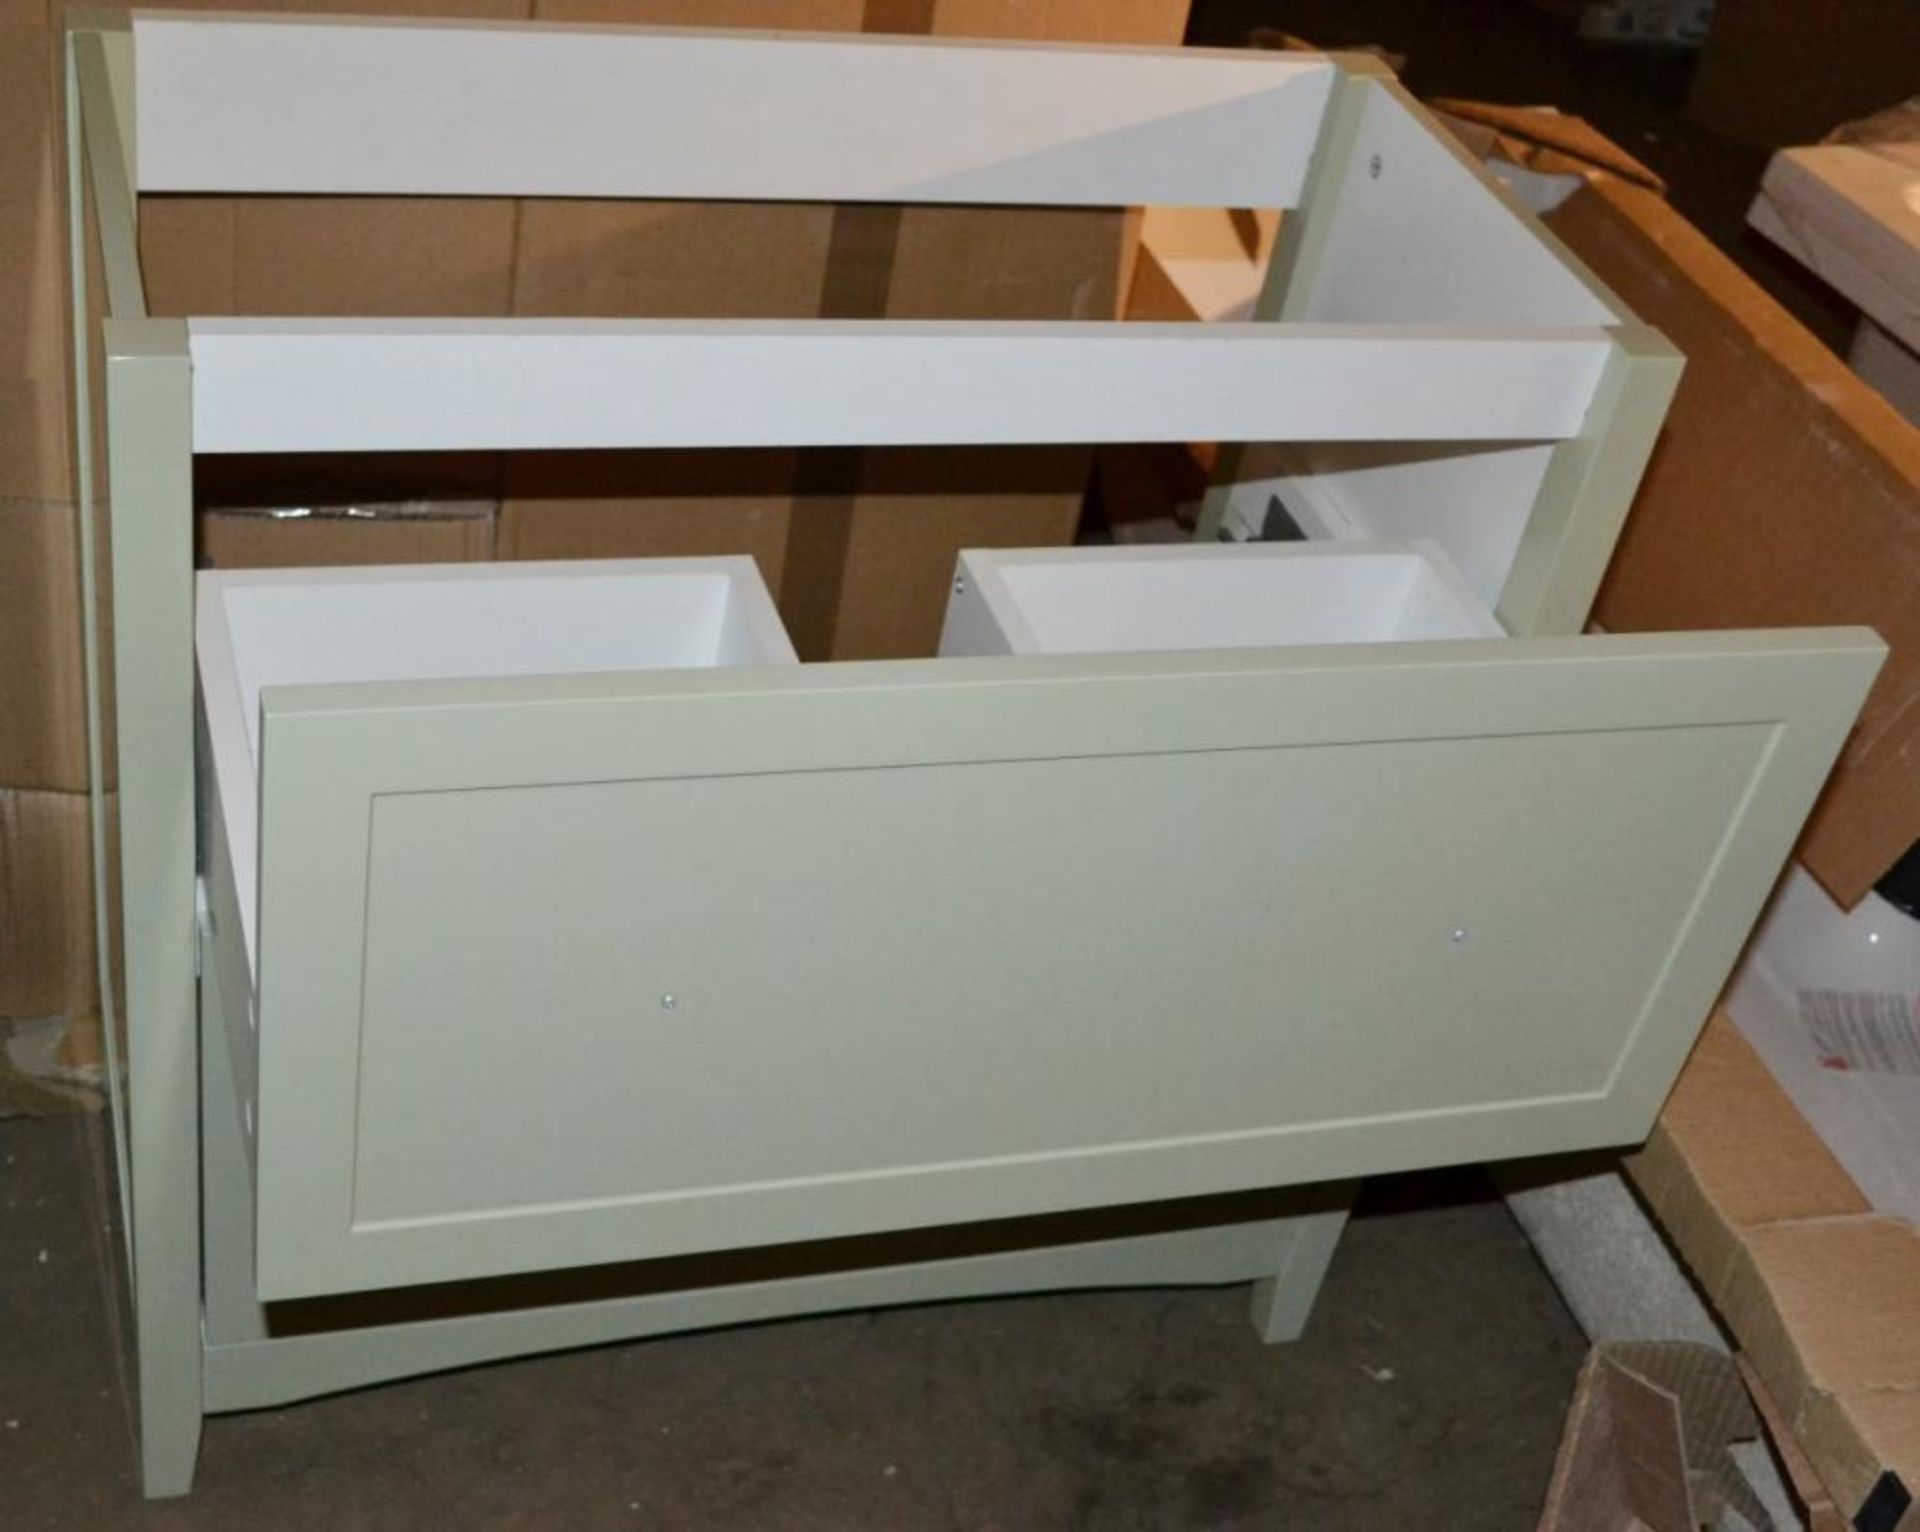 1 x Camberley 800 2-Drawer Soft Close Vanity Unit In Sage Green - New / Unused Stock - Dimensions: W - Image 6 of 8